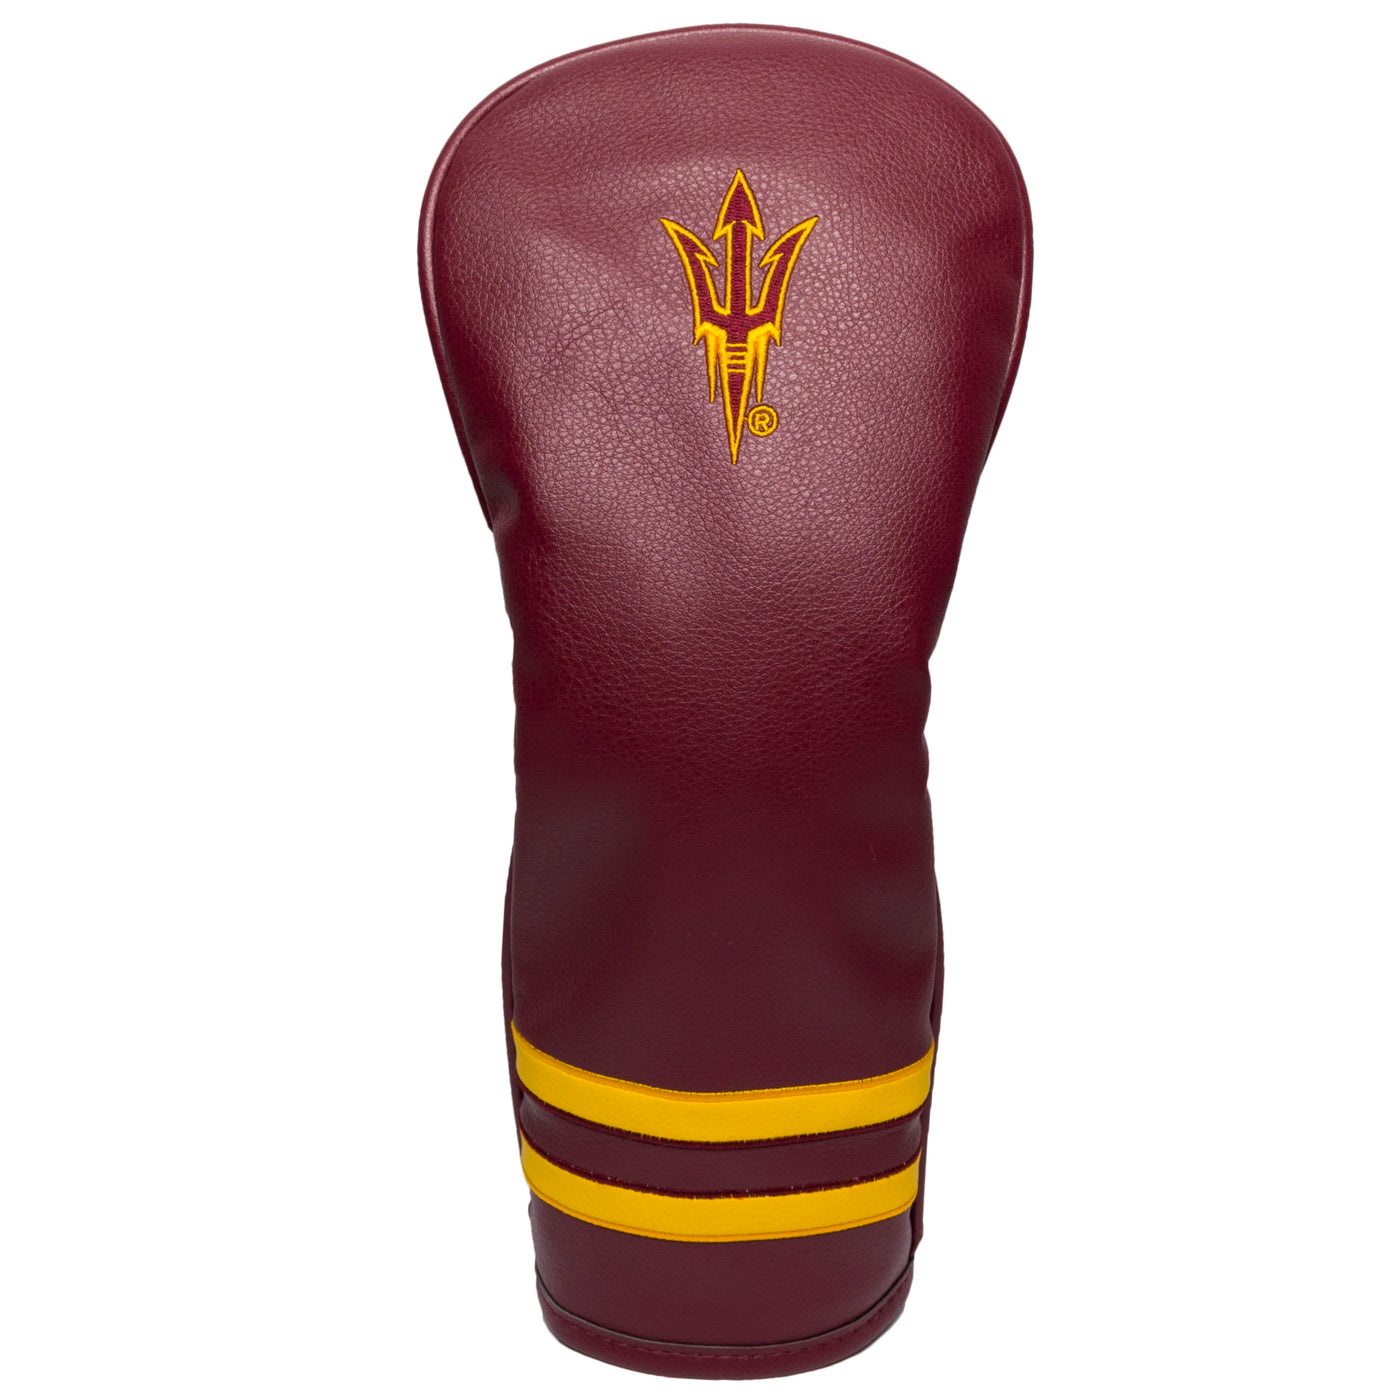 ASU maroon leather like material golf club head cover with an embroidered pitchfork at the top and 2 gold stripes at the base